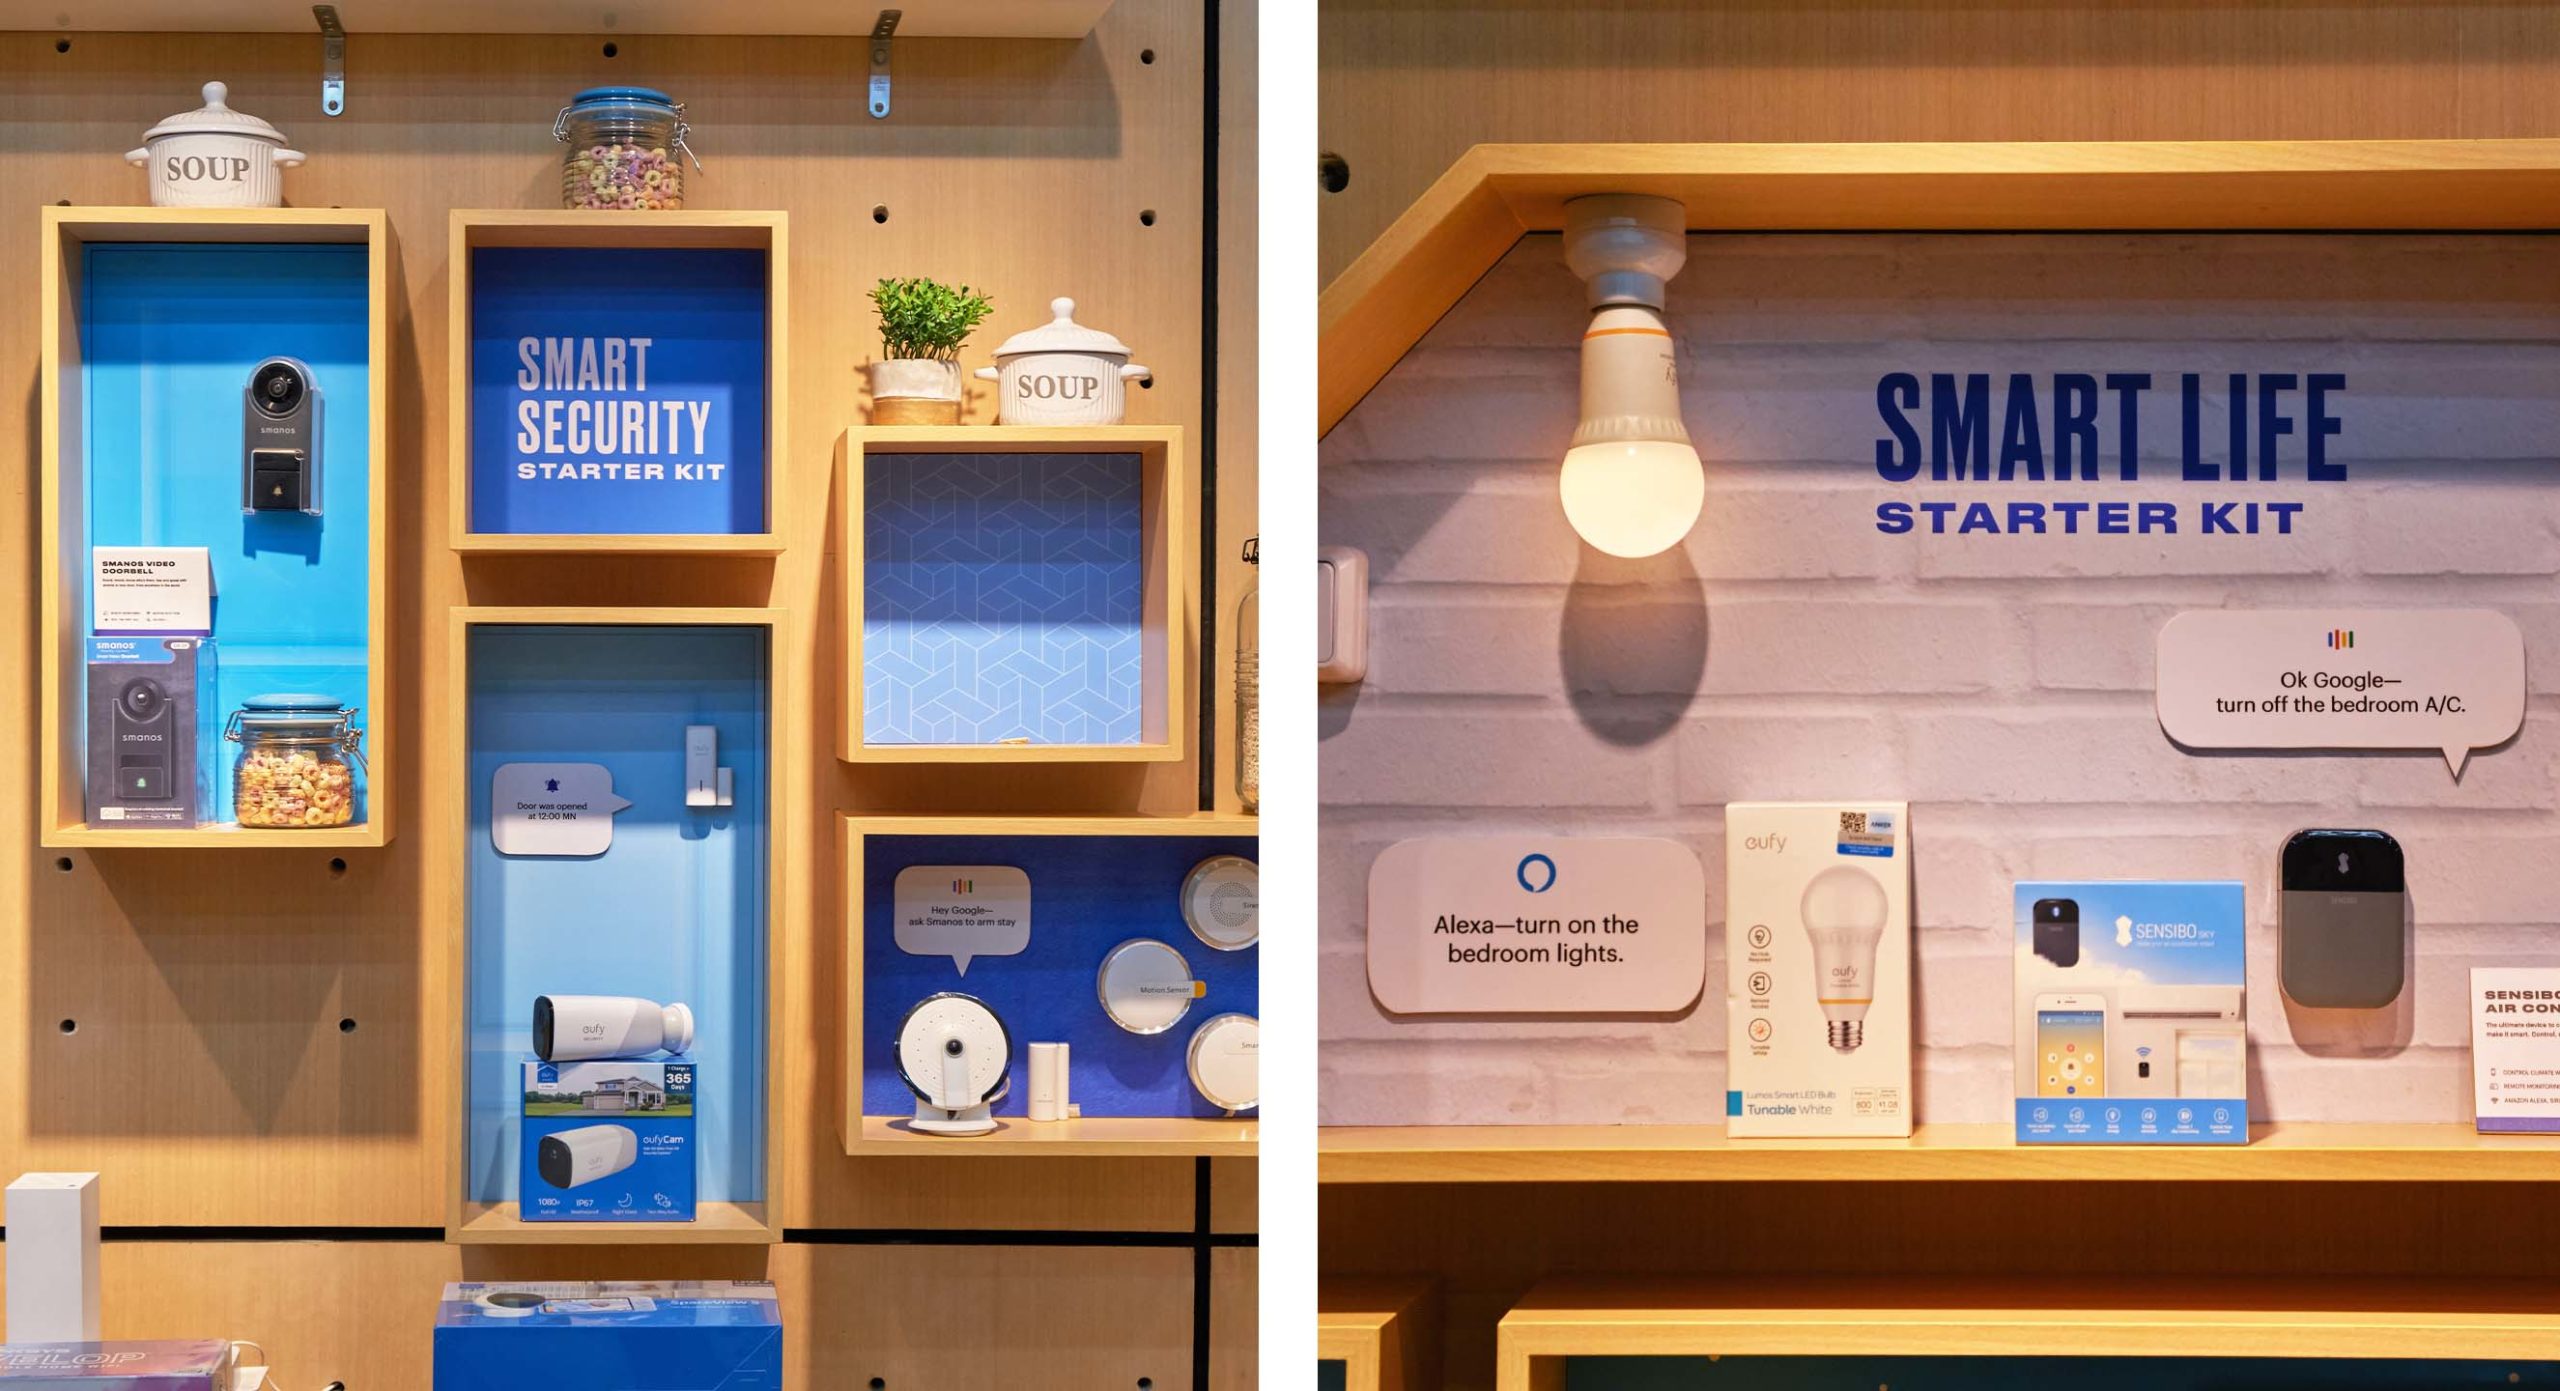 Store displays and environment collaterals for retail tech brand Nifty